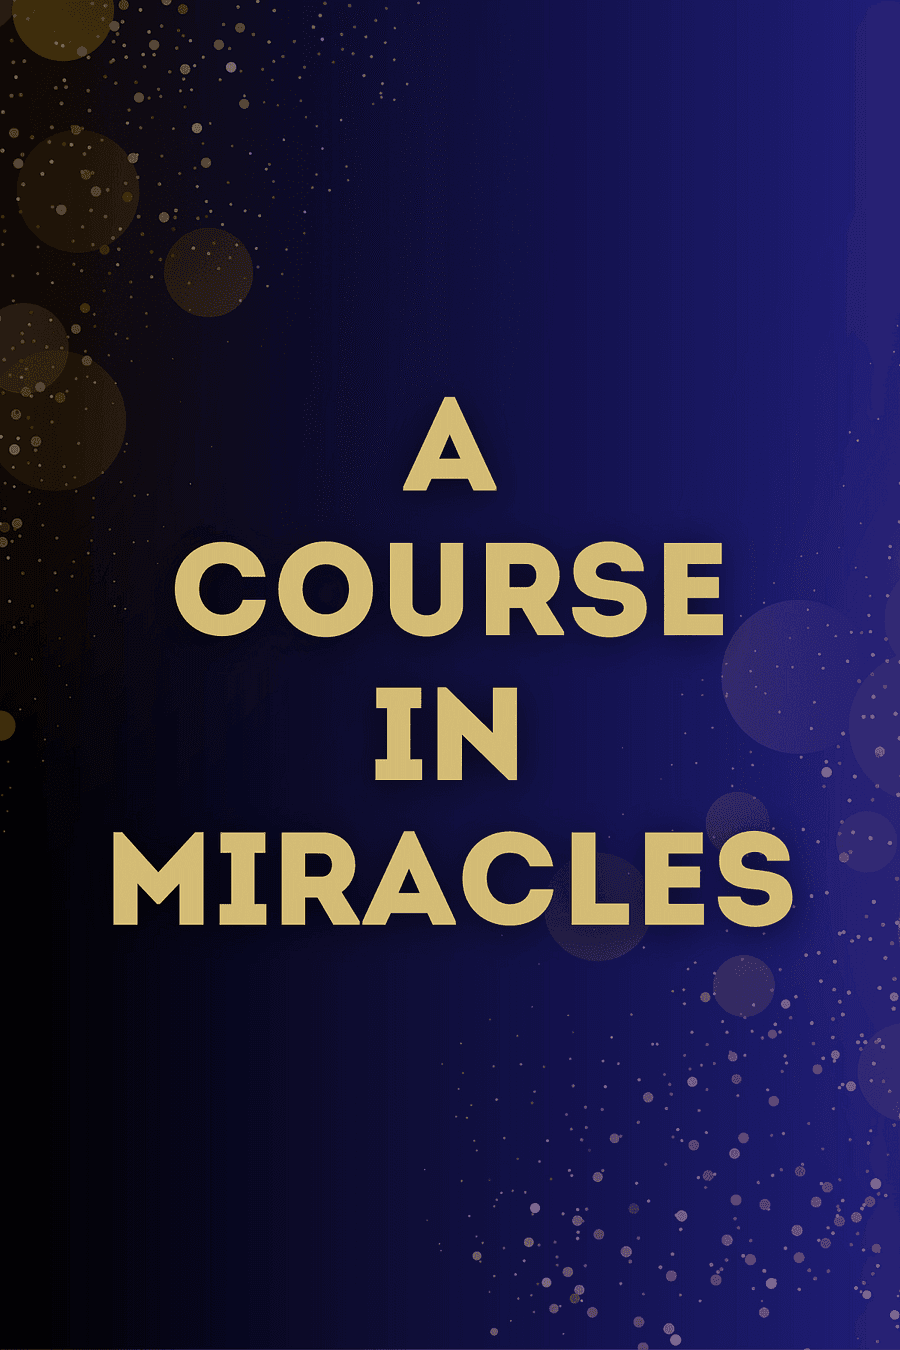 A Course in Miracles
Book by Dr. Helen Schucman - Book Summary